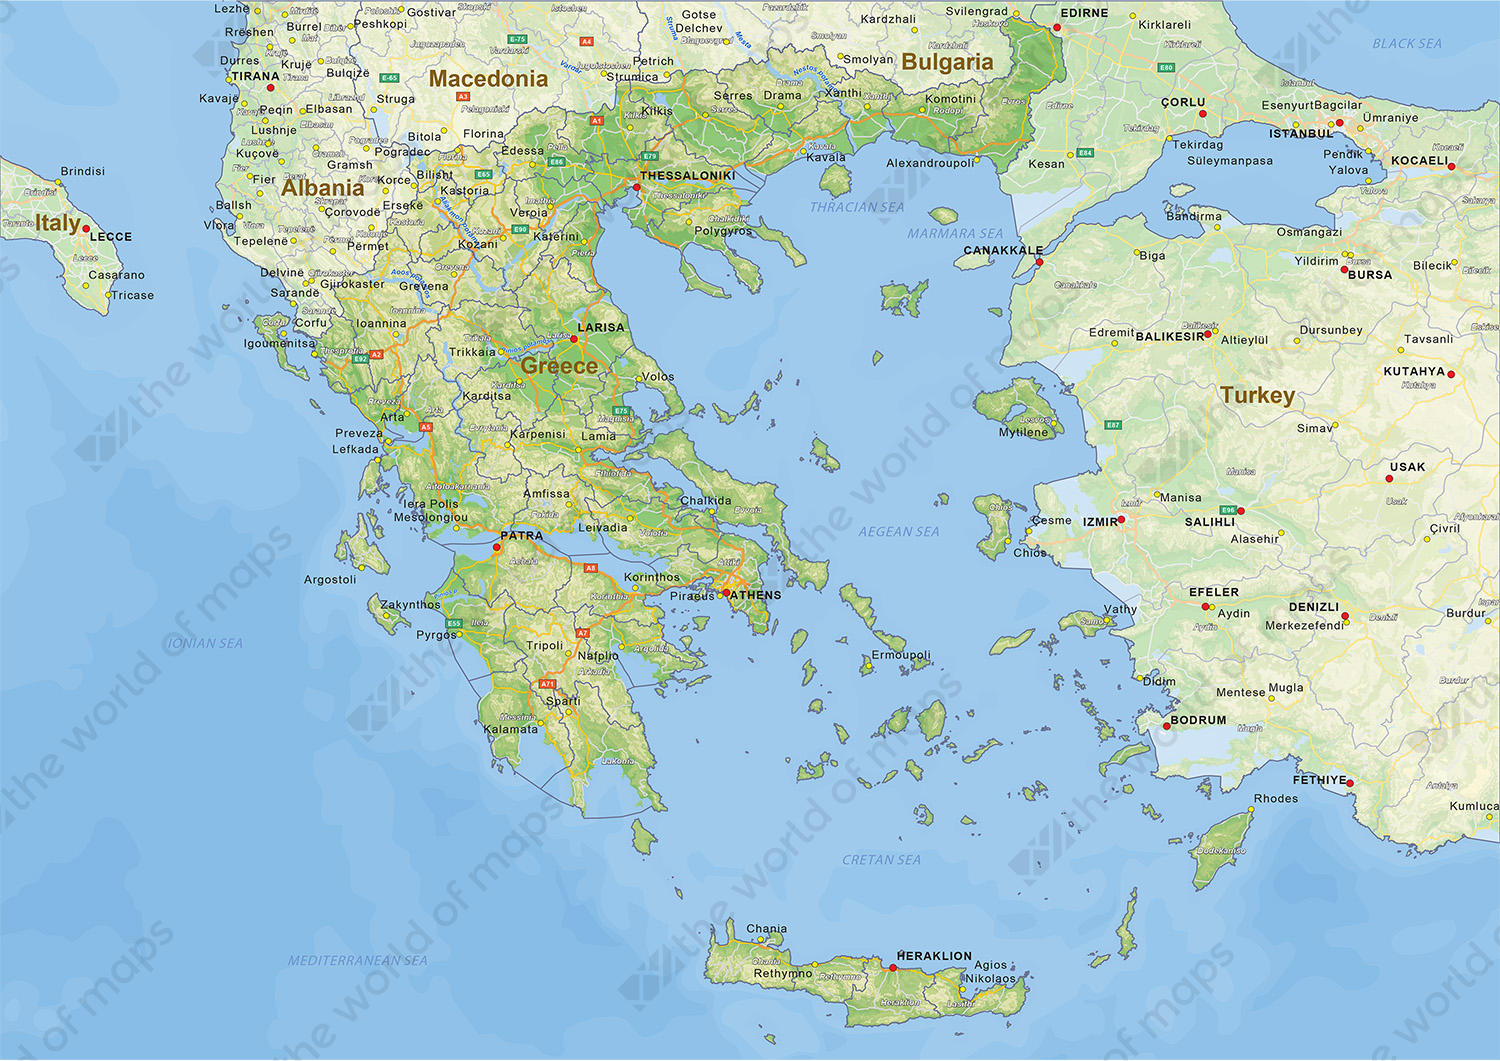 Digital physical map of Greece 1435 | The World of Maps.com